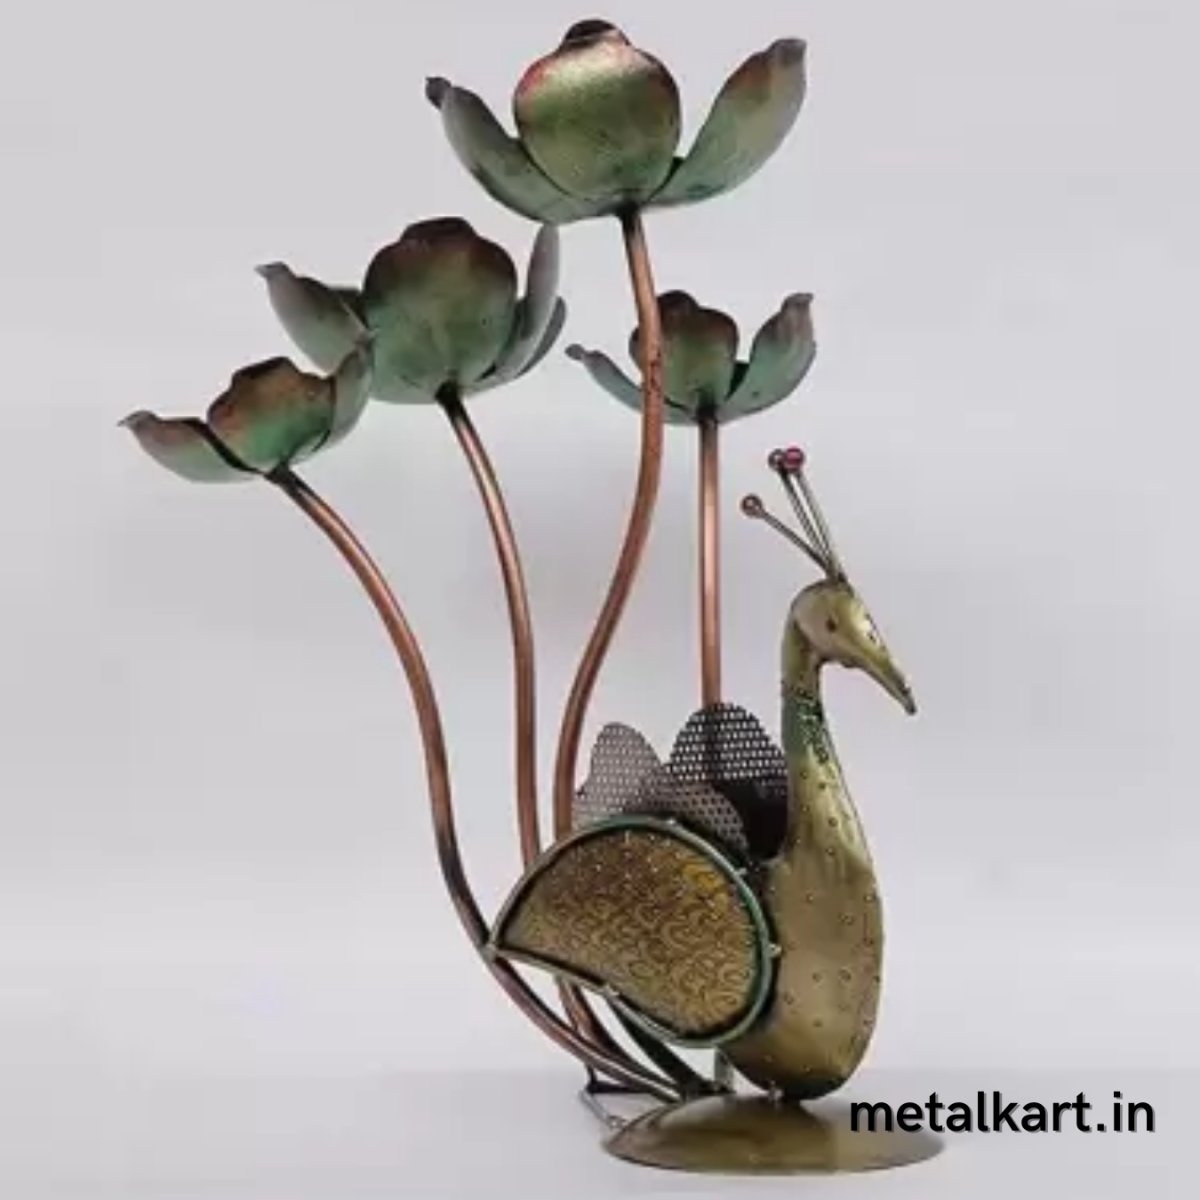 Metallic Peacock Carrying T-Lite Holder Table décor (17*13*20 Inches approx)